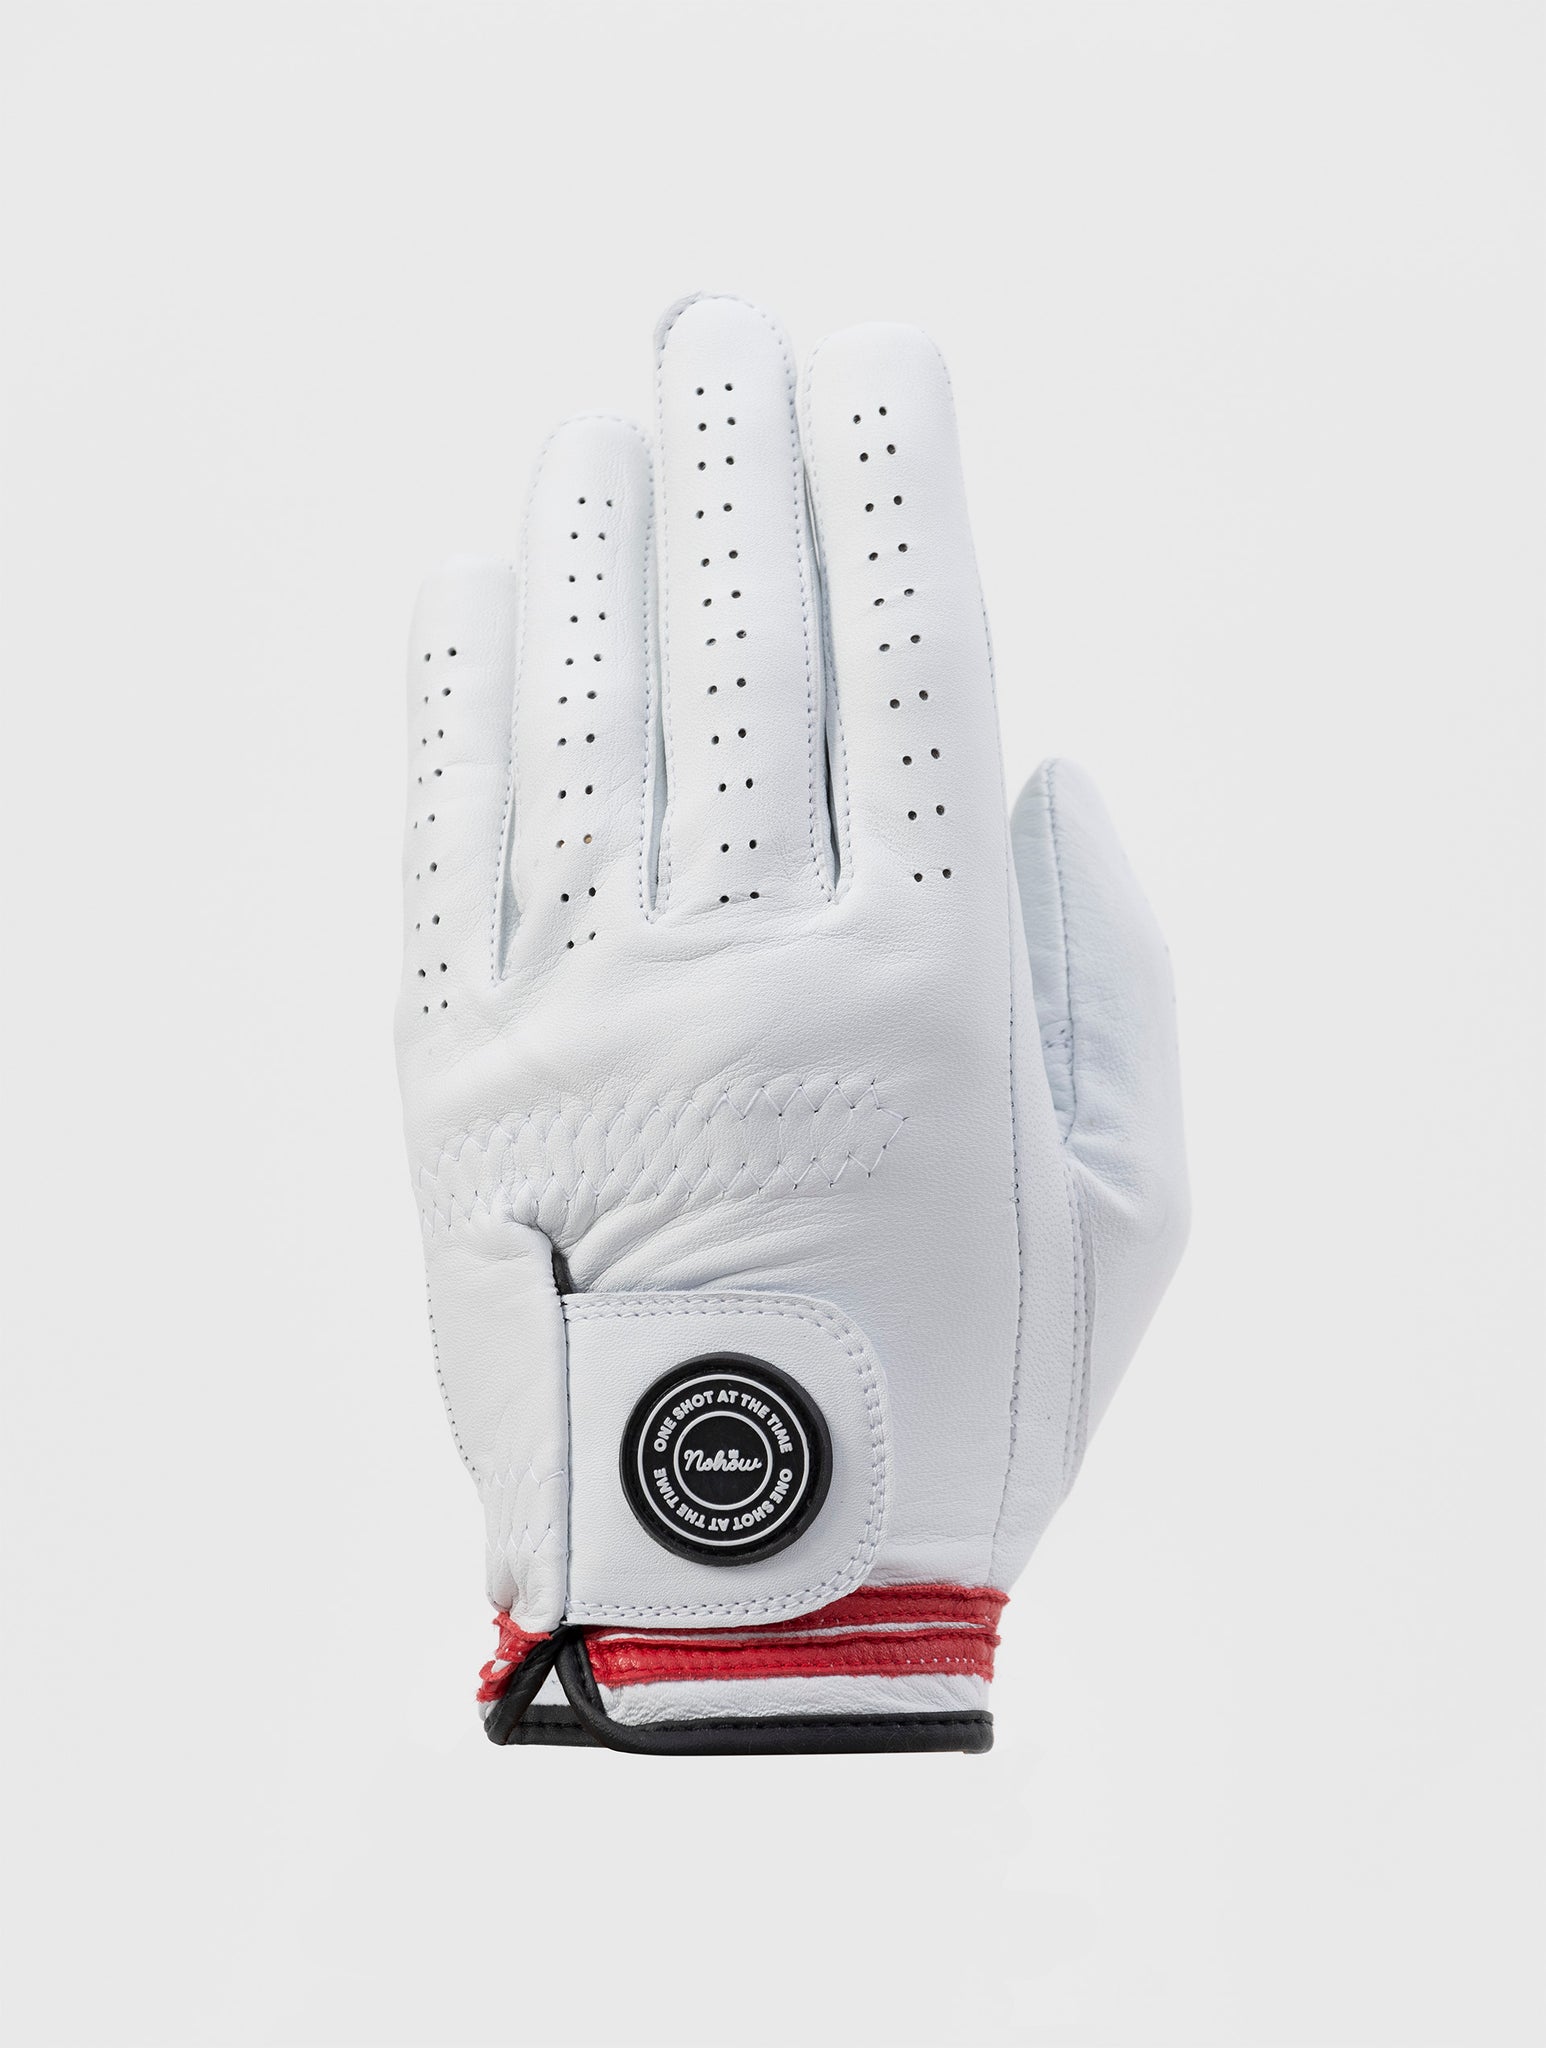 NOHOW GOLF LEFT GLOVE IN WHITE AND RED